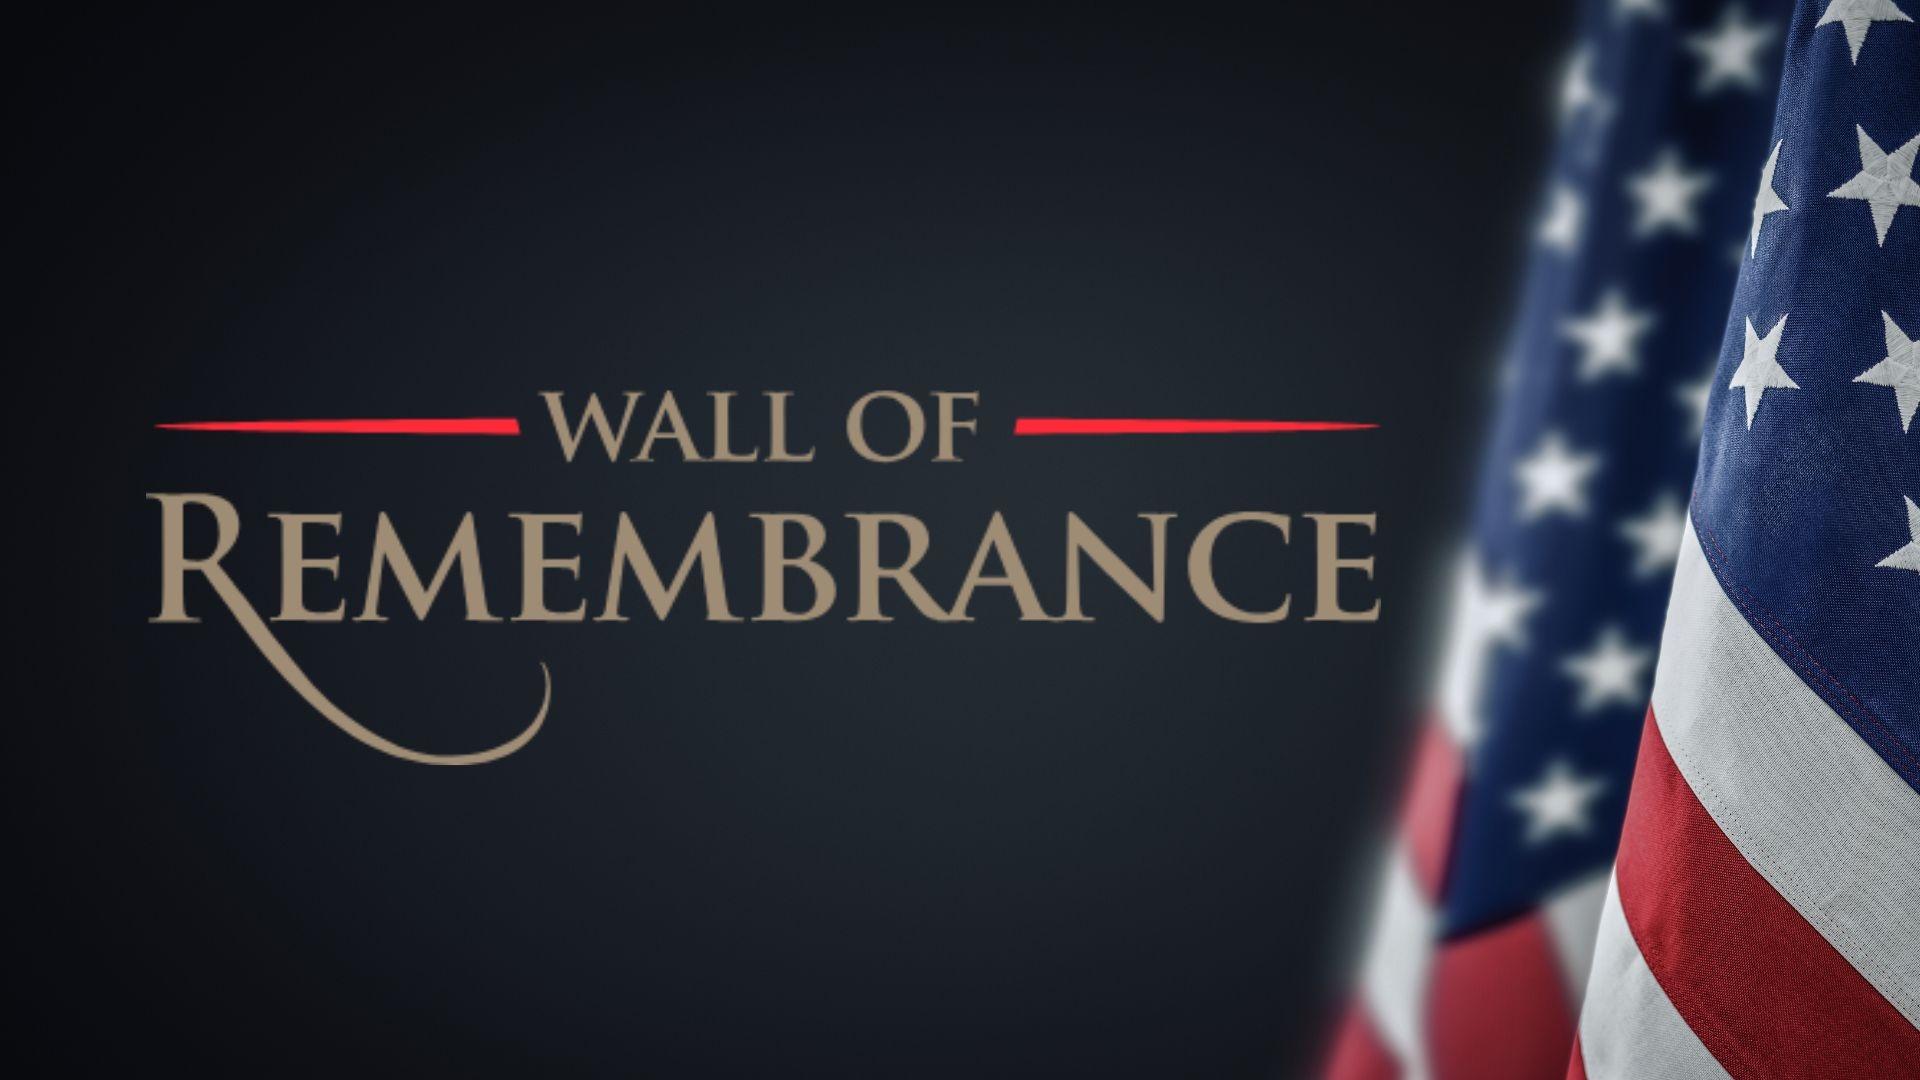 Wall of Remembrance with the United States flag to the right.